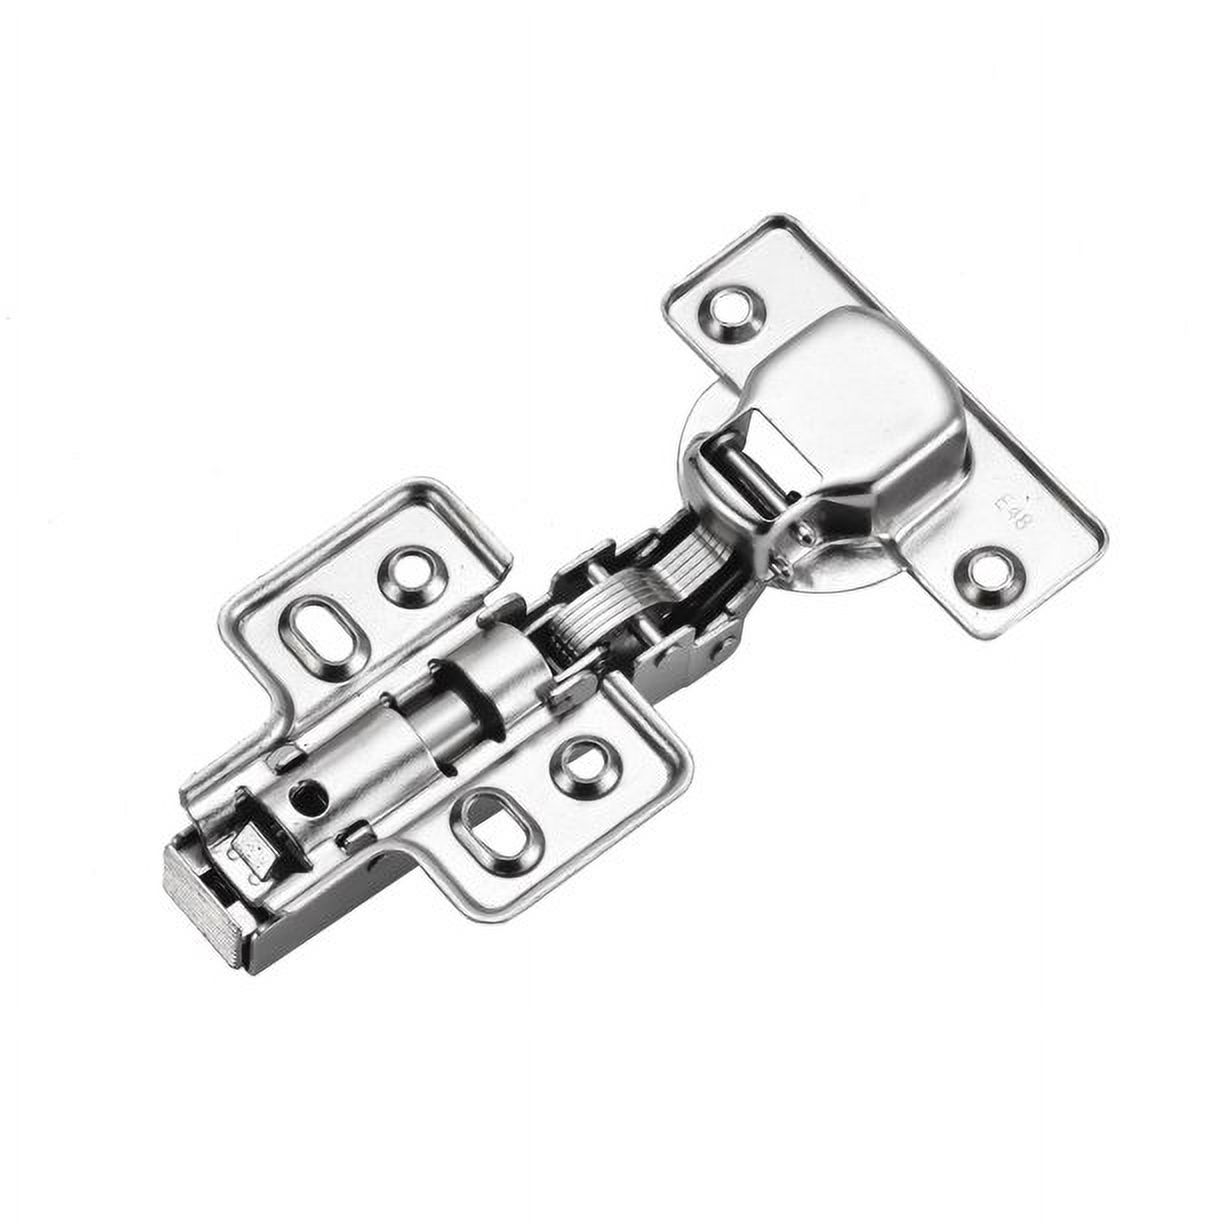 Luokim 10pcs Standard Cabinet Hinge,Fit for Frameless Cabinet,European Full Overlay,Soft Closing,Four-Hole mounting Plate Hinges,Nickel Plated Finish - image 4 of 7